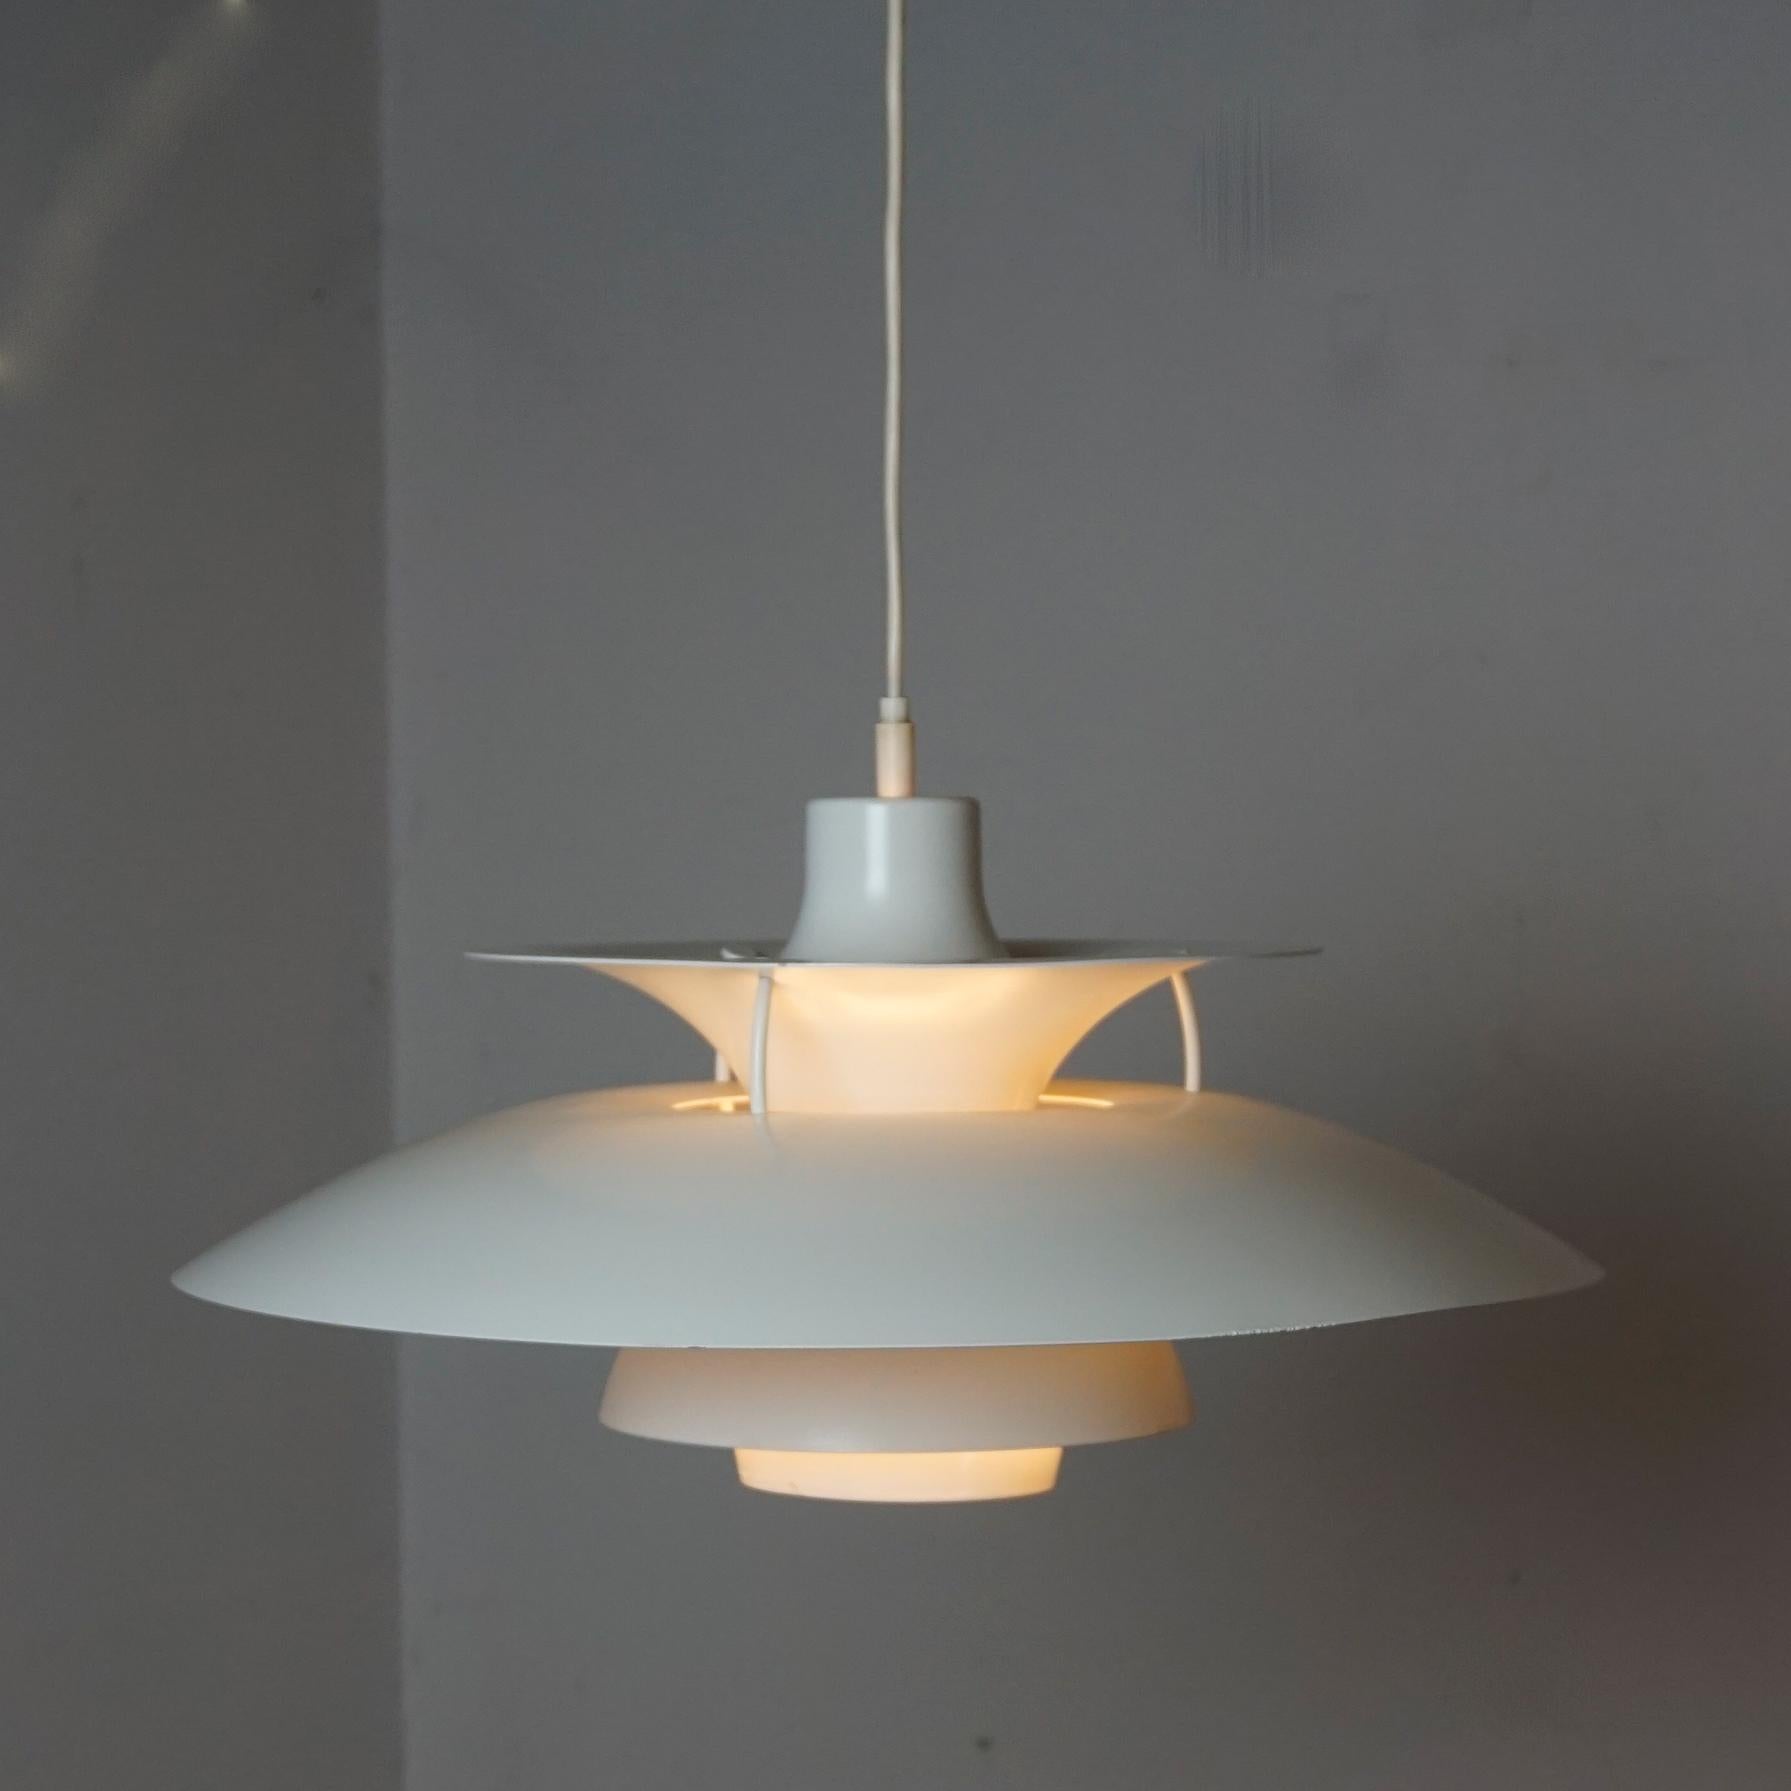 The PH5 was designed by Poul Henningsen 1958 and produced by Louis Poulsen.
The iconic fixture provides 100% glare-free light. Poul Henningsen developed the PH 5 in 1958 as a follow-up to his celebrated three-shade system. The fixture emits both